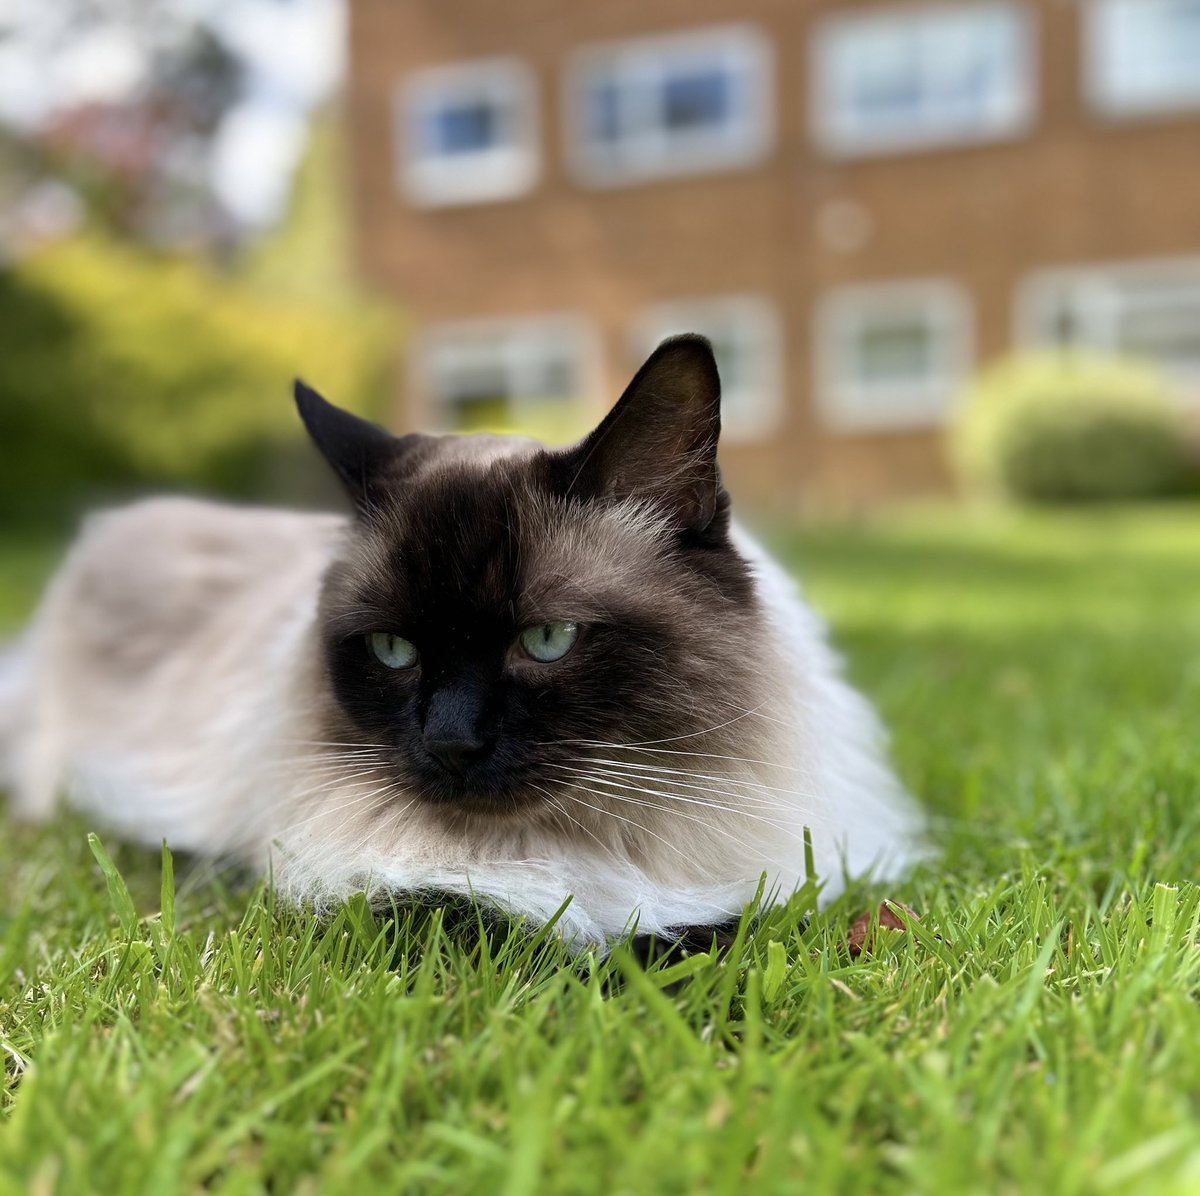 Floating like a fluffy cloud on the grass. #kittyloafmonday